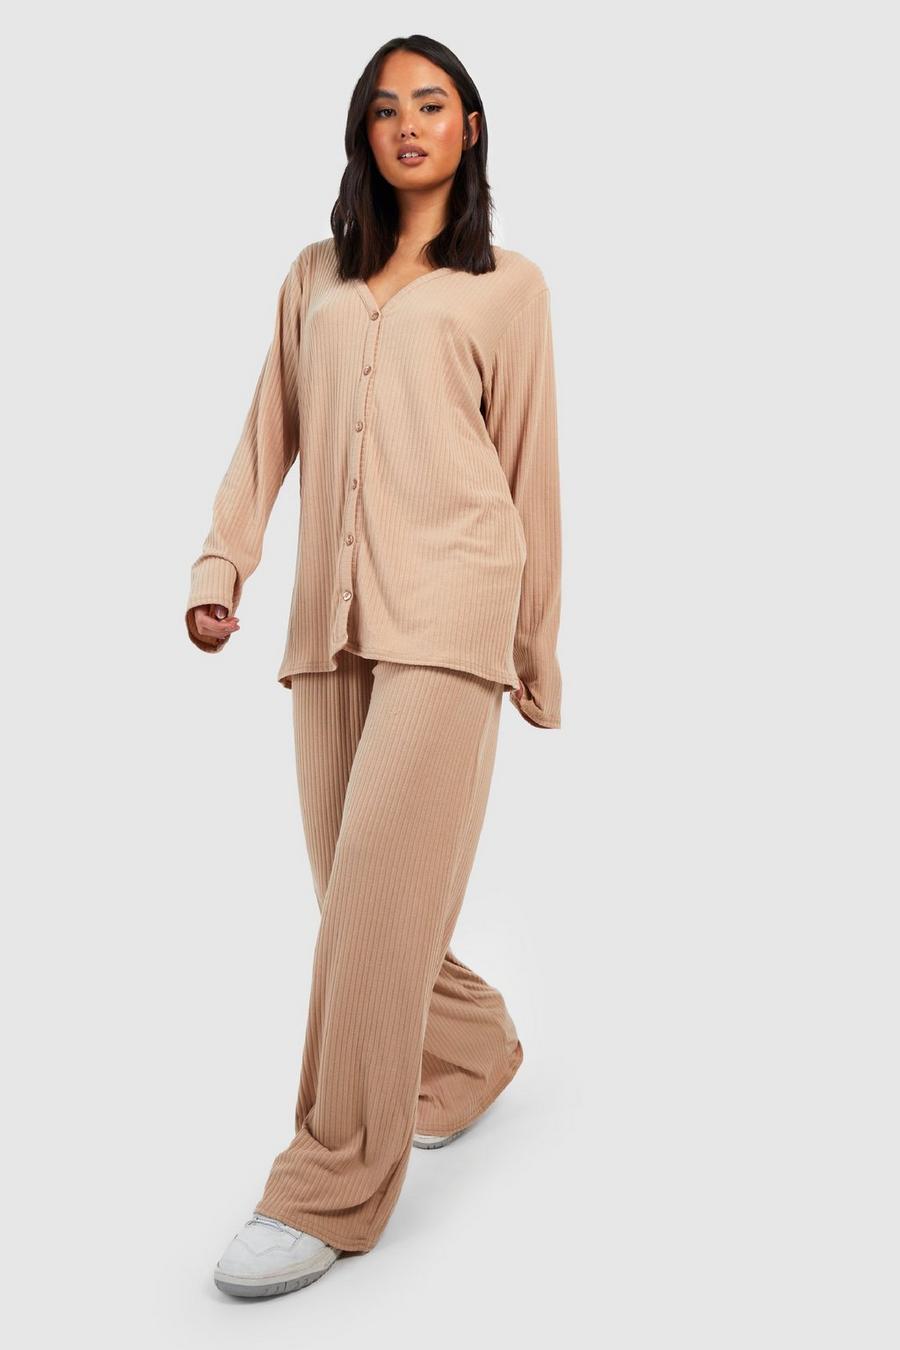 Camel Soft Rib Knit Cardigan And Pants Relaxed Co-Ord image number 1